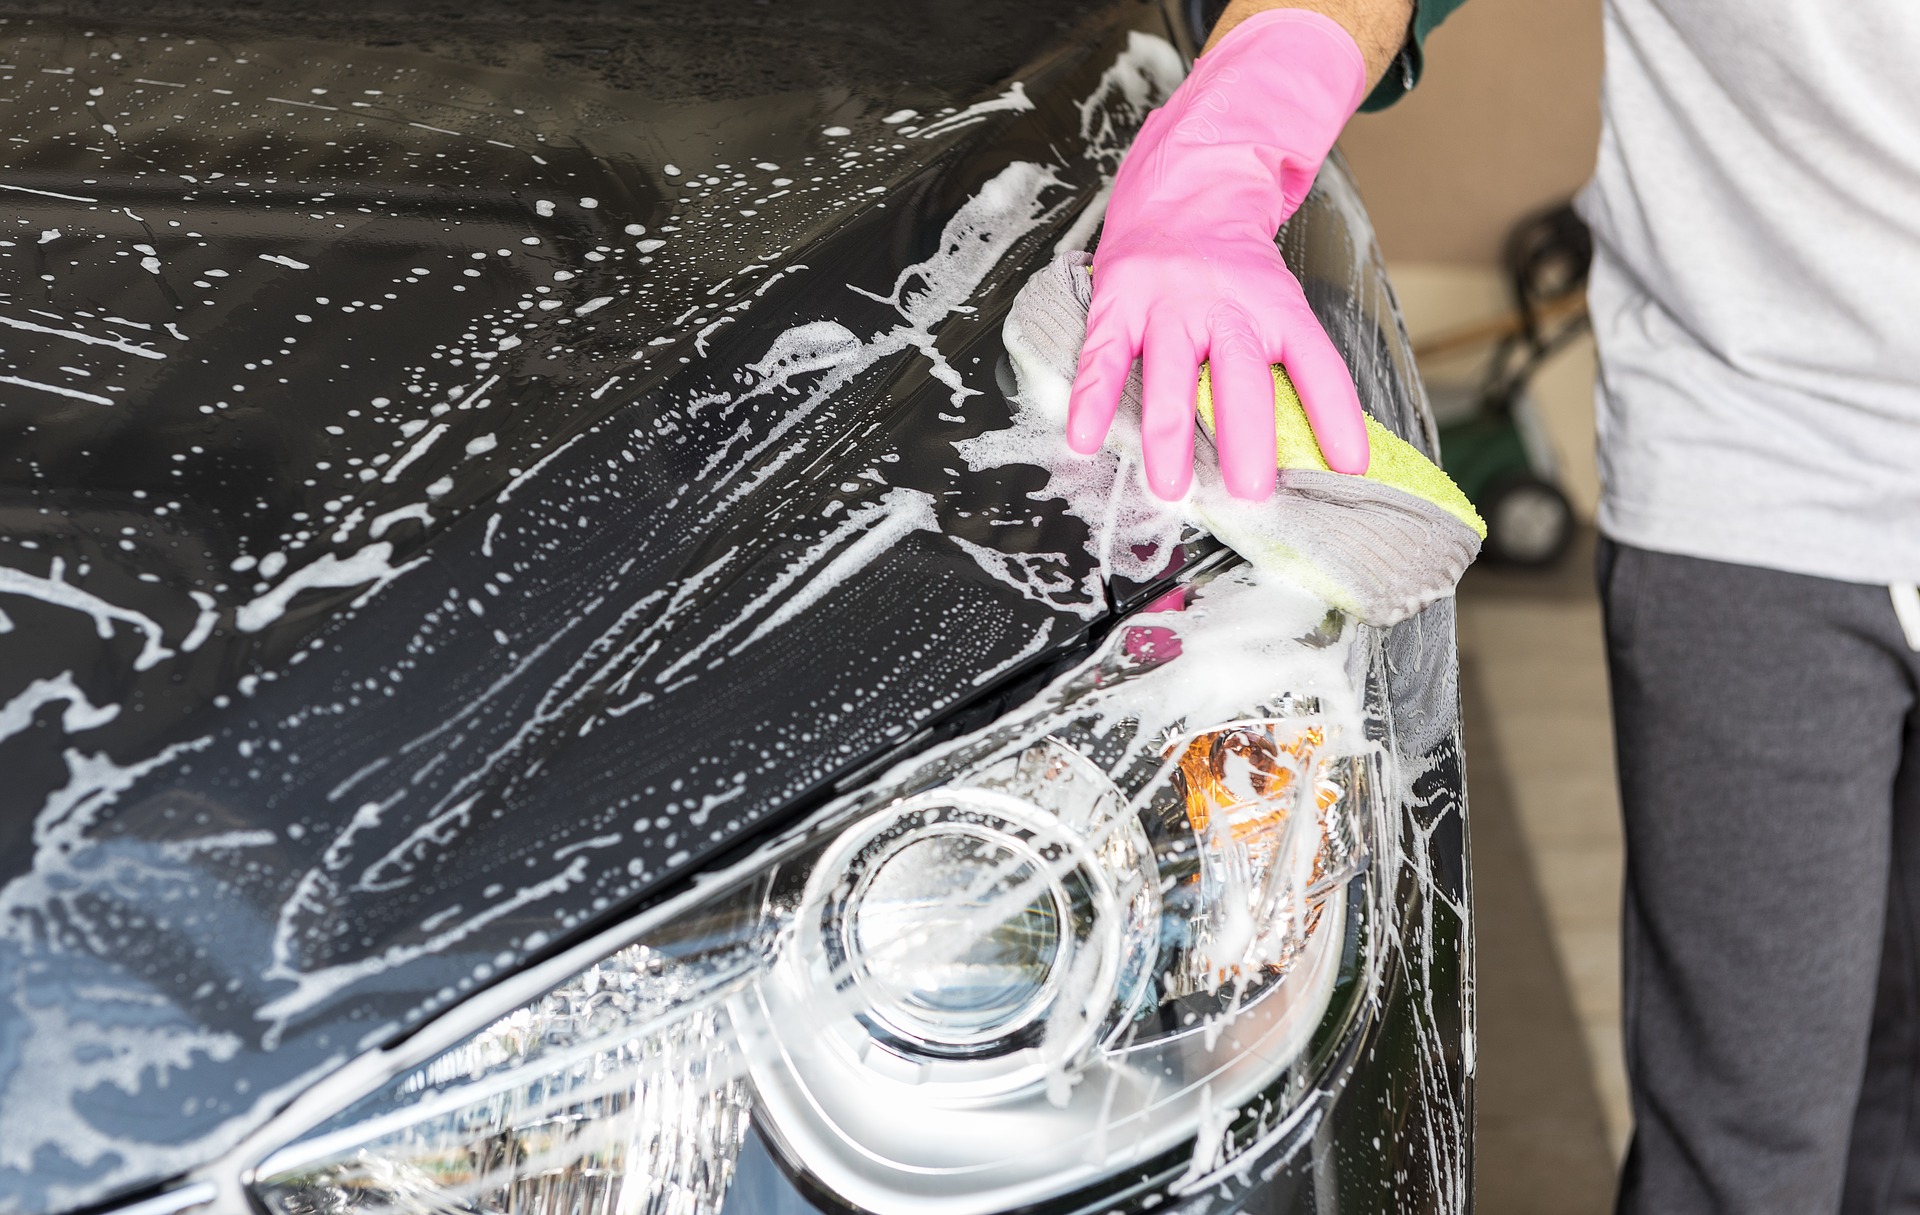 95% of car owners only wash their car twice a year or less